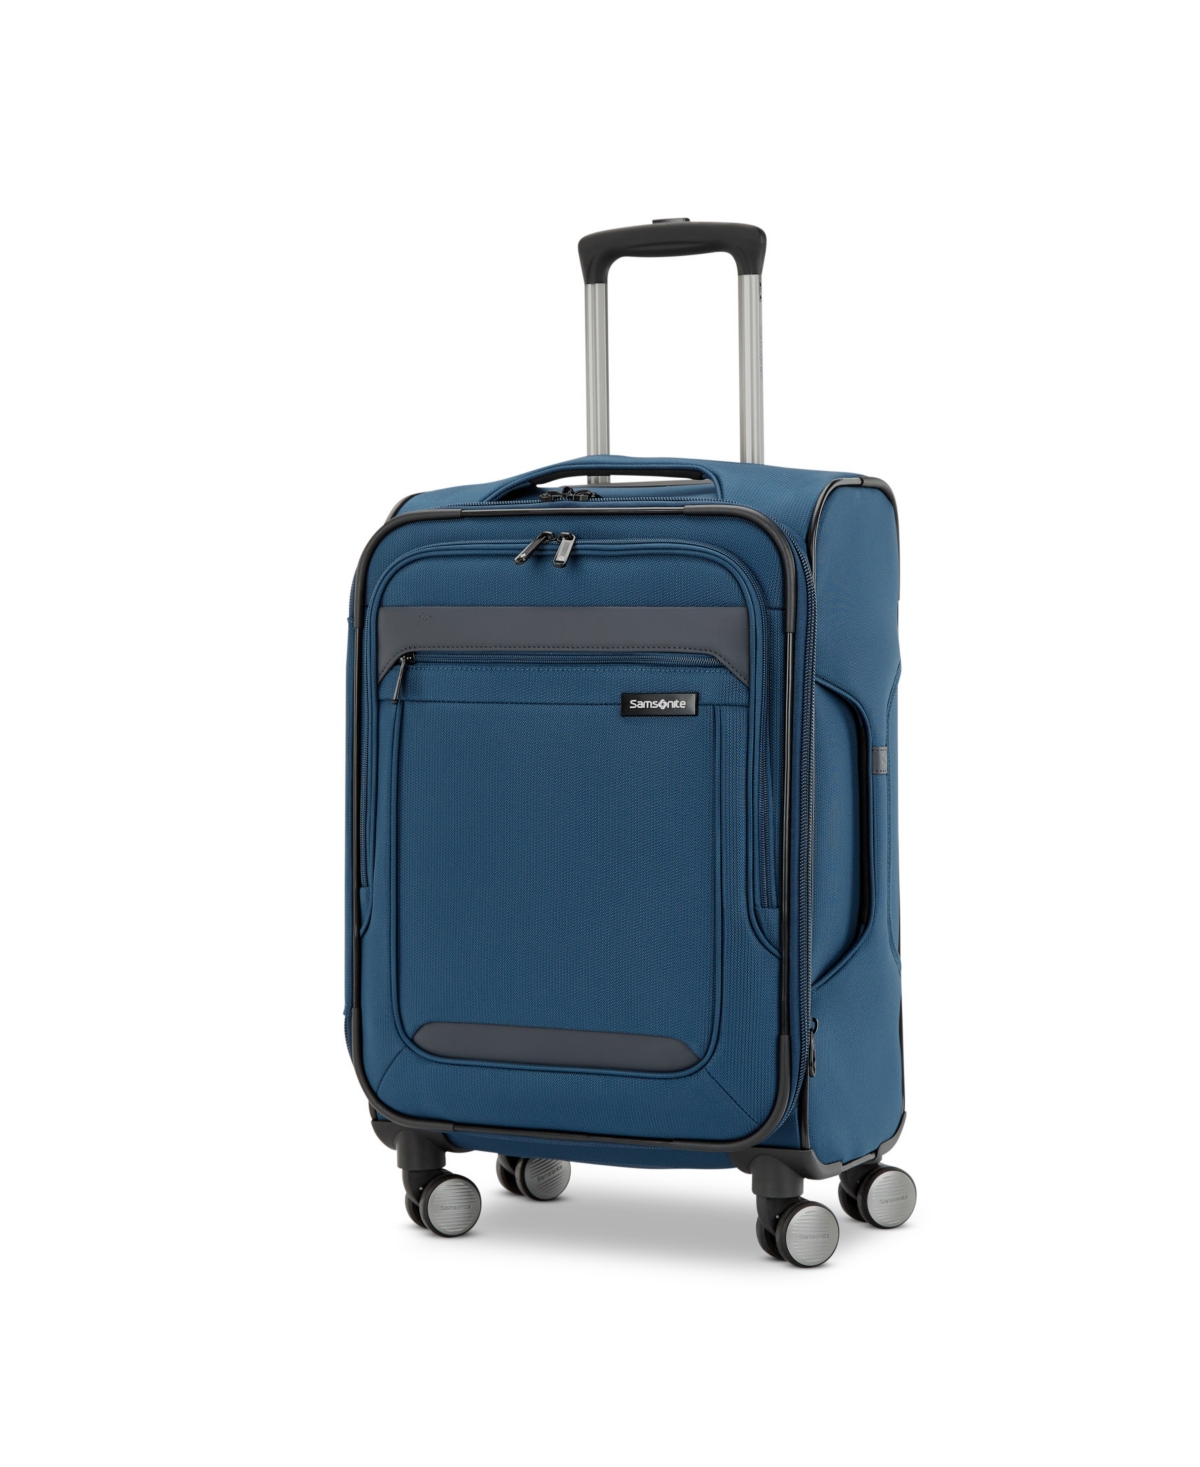 Samsonite X-tralight 3.0 20" Carry-on Spinner Trolley, Created For Macy's In Deep Teal